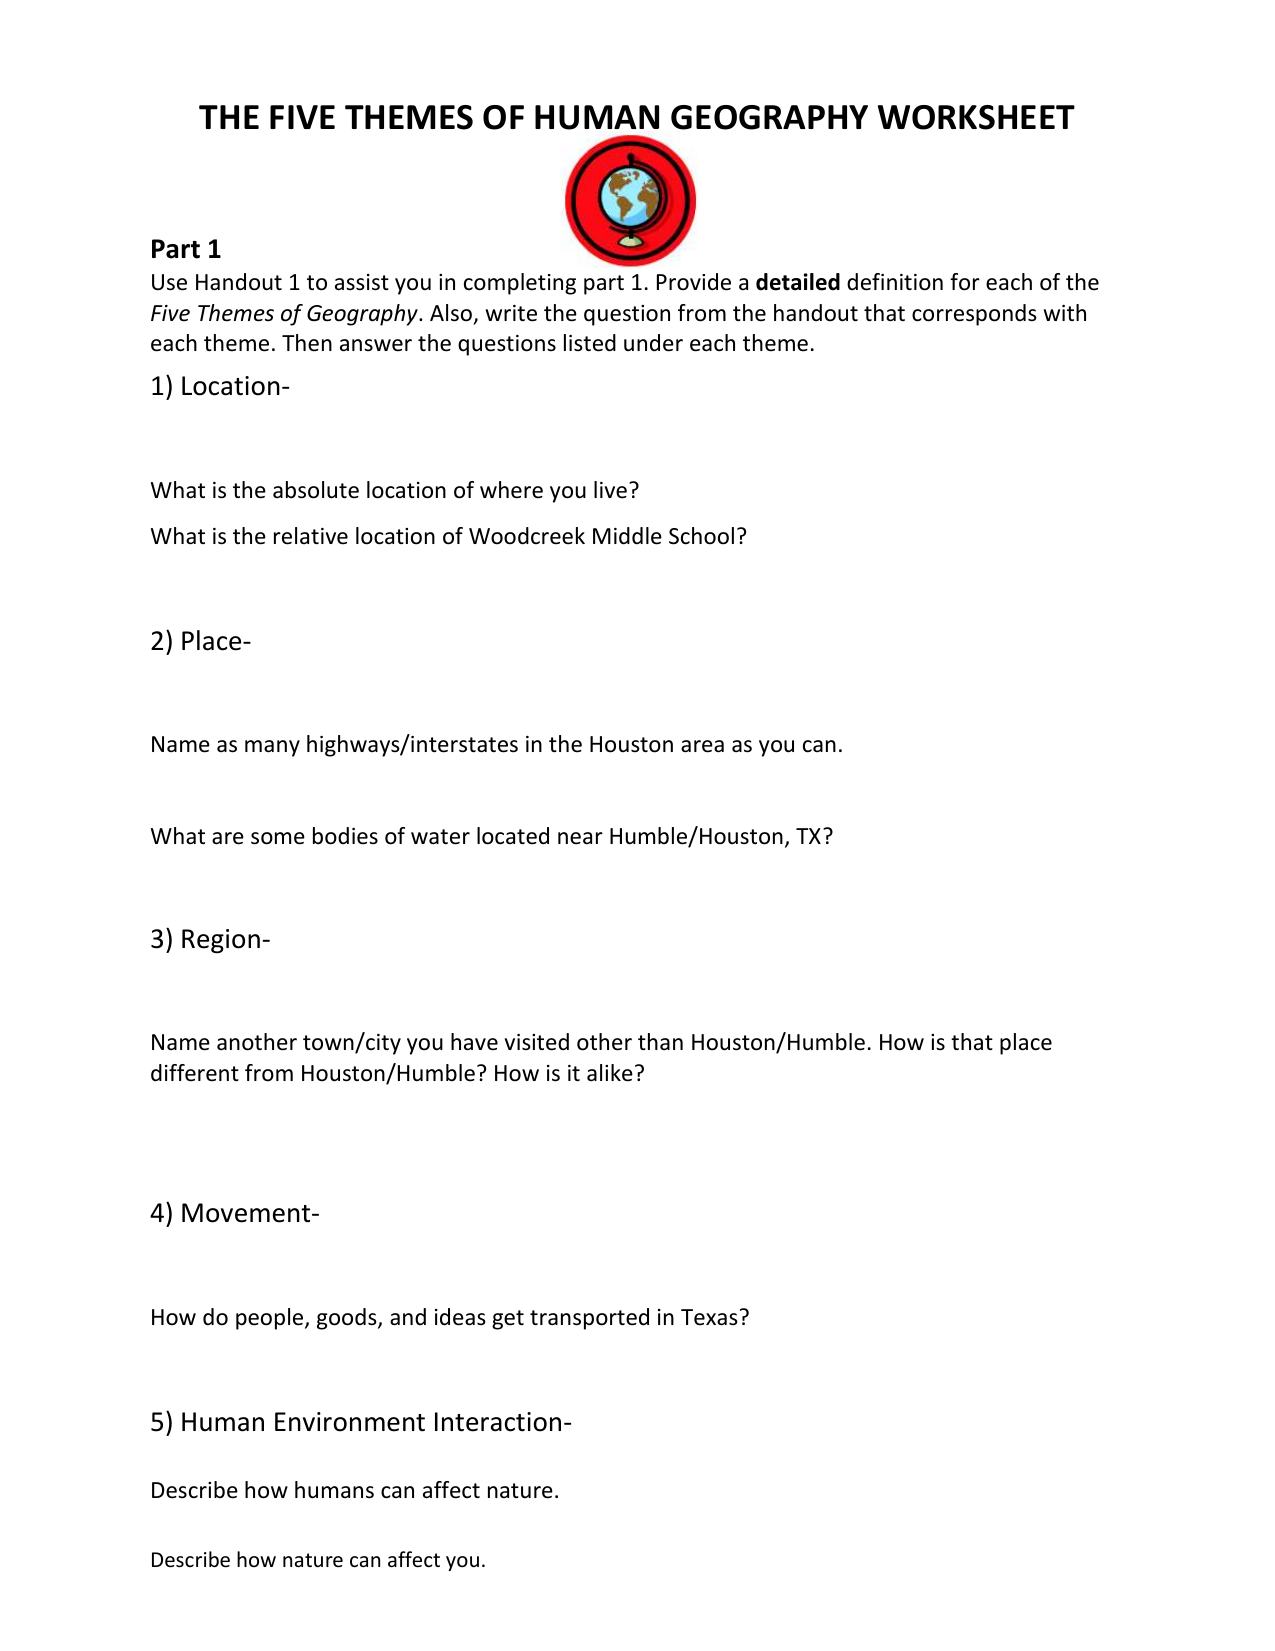 THE FIVE THEMES OF HUMAN GEOGRAPHY WORKSHEET Part 21 In 5 Themes Of Geography Worksheet